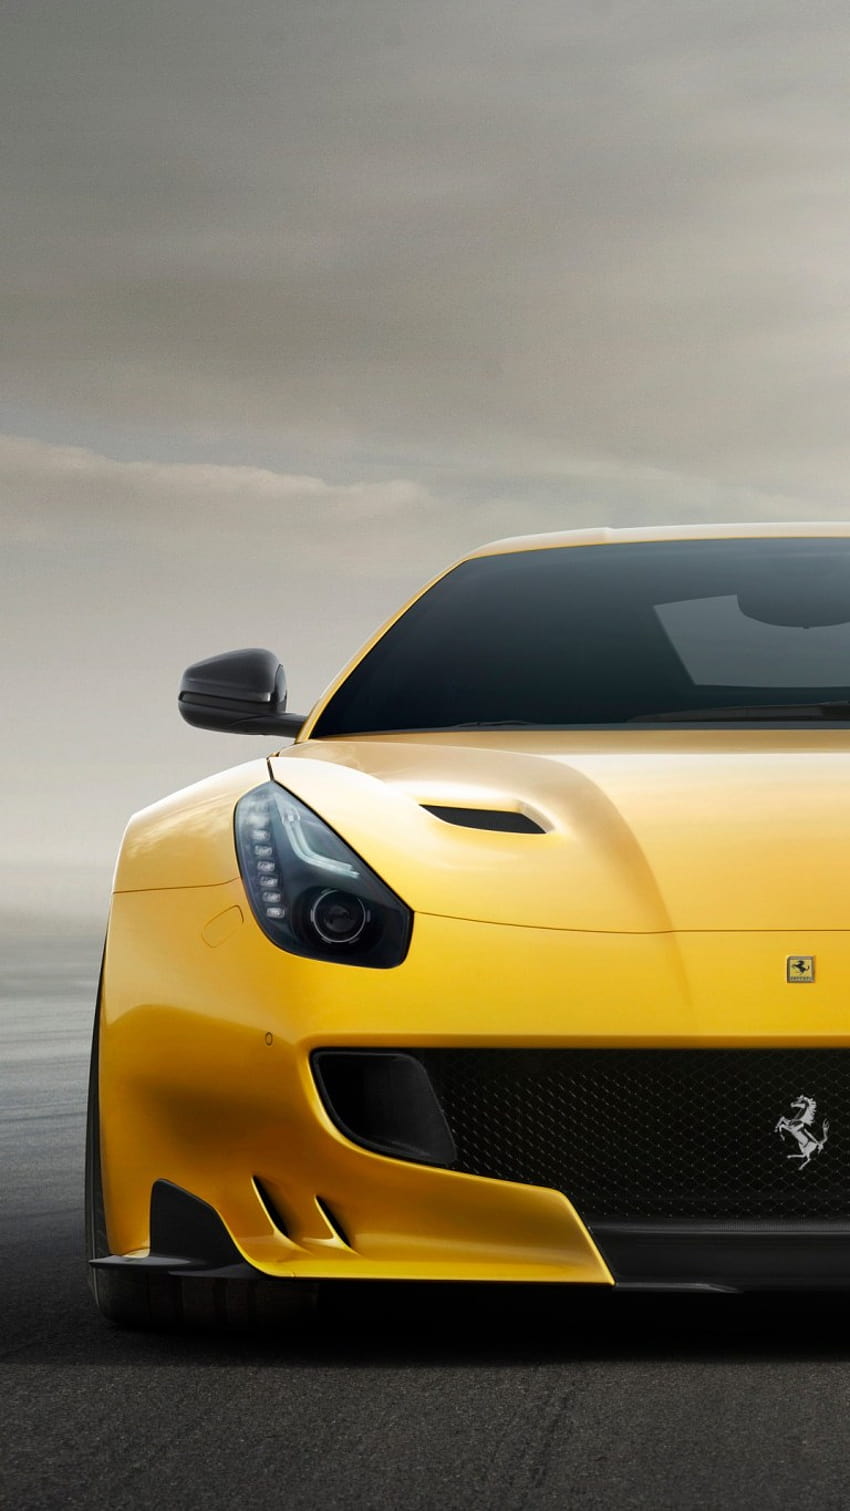 Download Ferrari F12 TDF wallpaper by djredbull  3e  Free on ZEDGE now  Browse millions of popular automotive Wal  Car wallpapers Ferrari f12  tdf Ferrari car